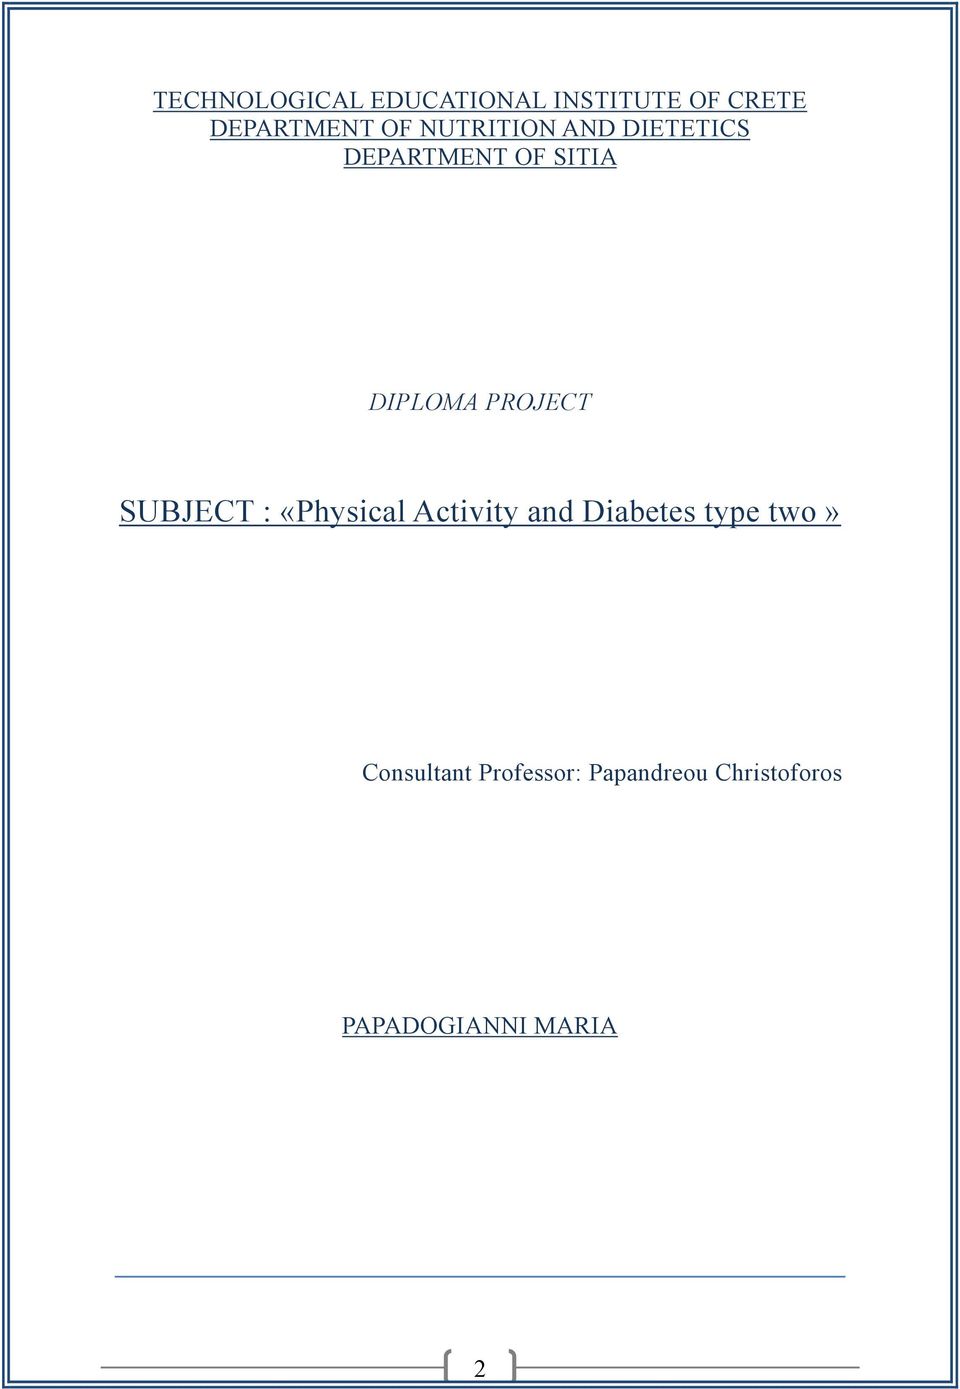 SUBJECT : «Physical Activity and Diabetes type two»